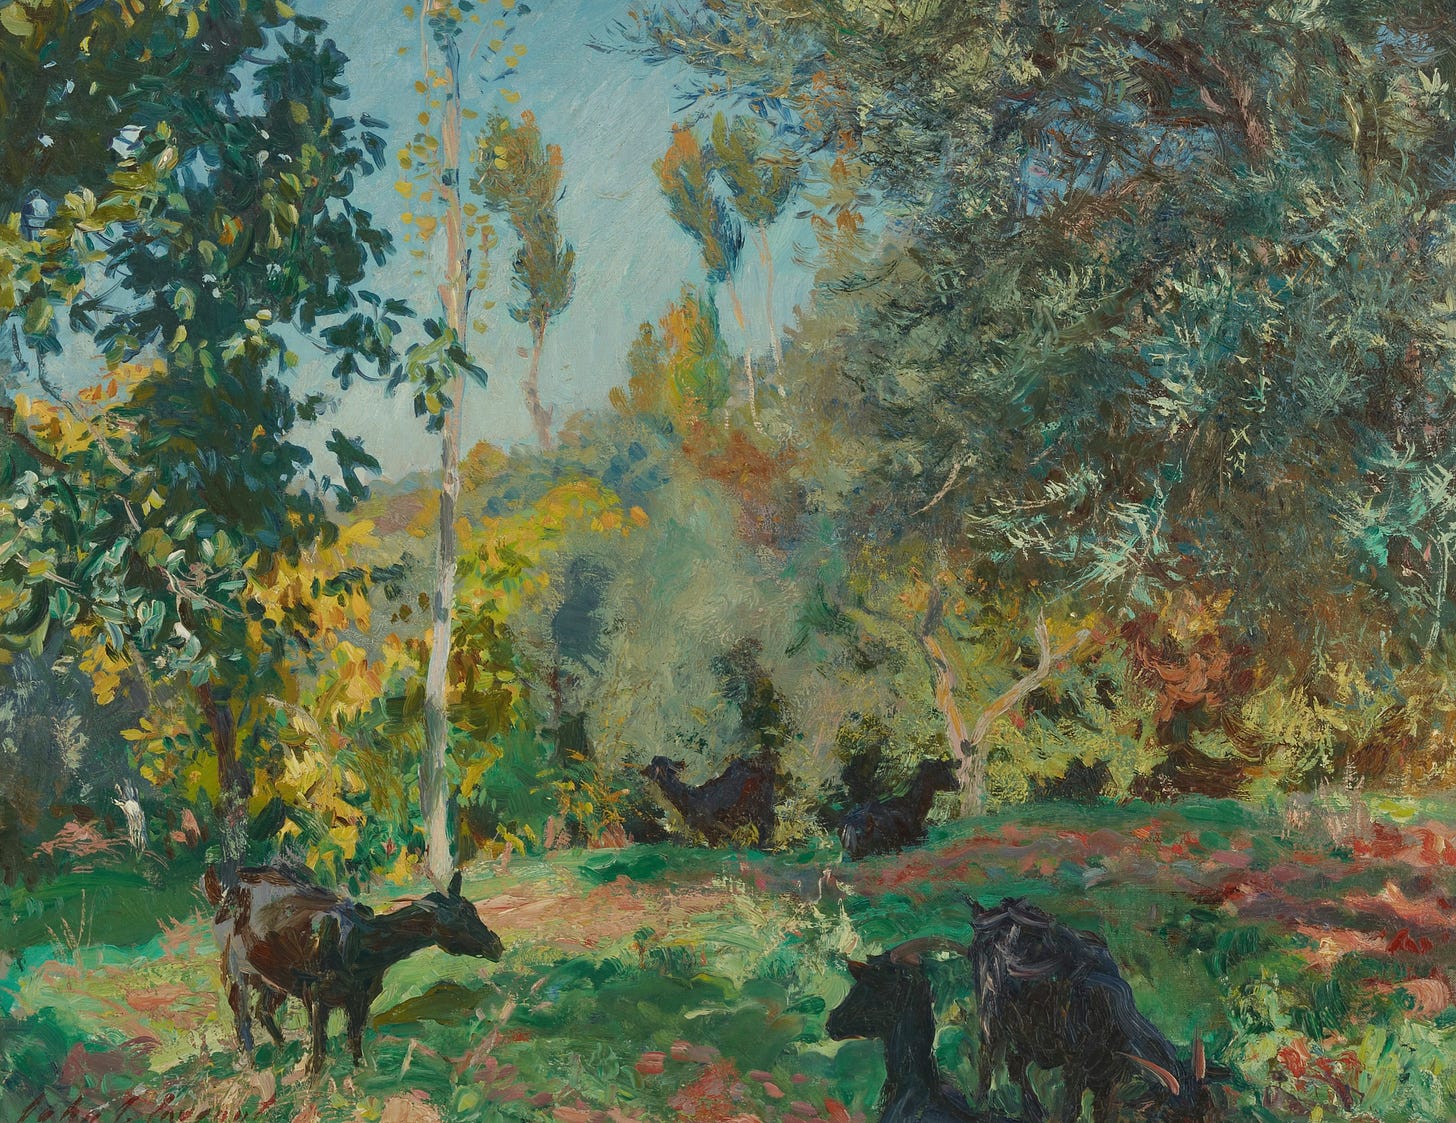 Landscape with Goats (1920)